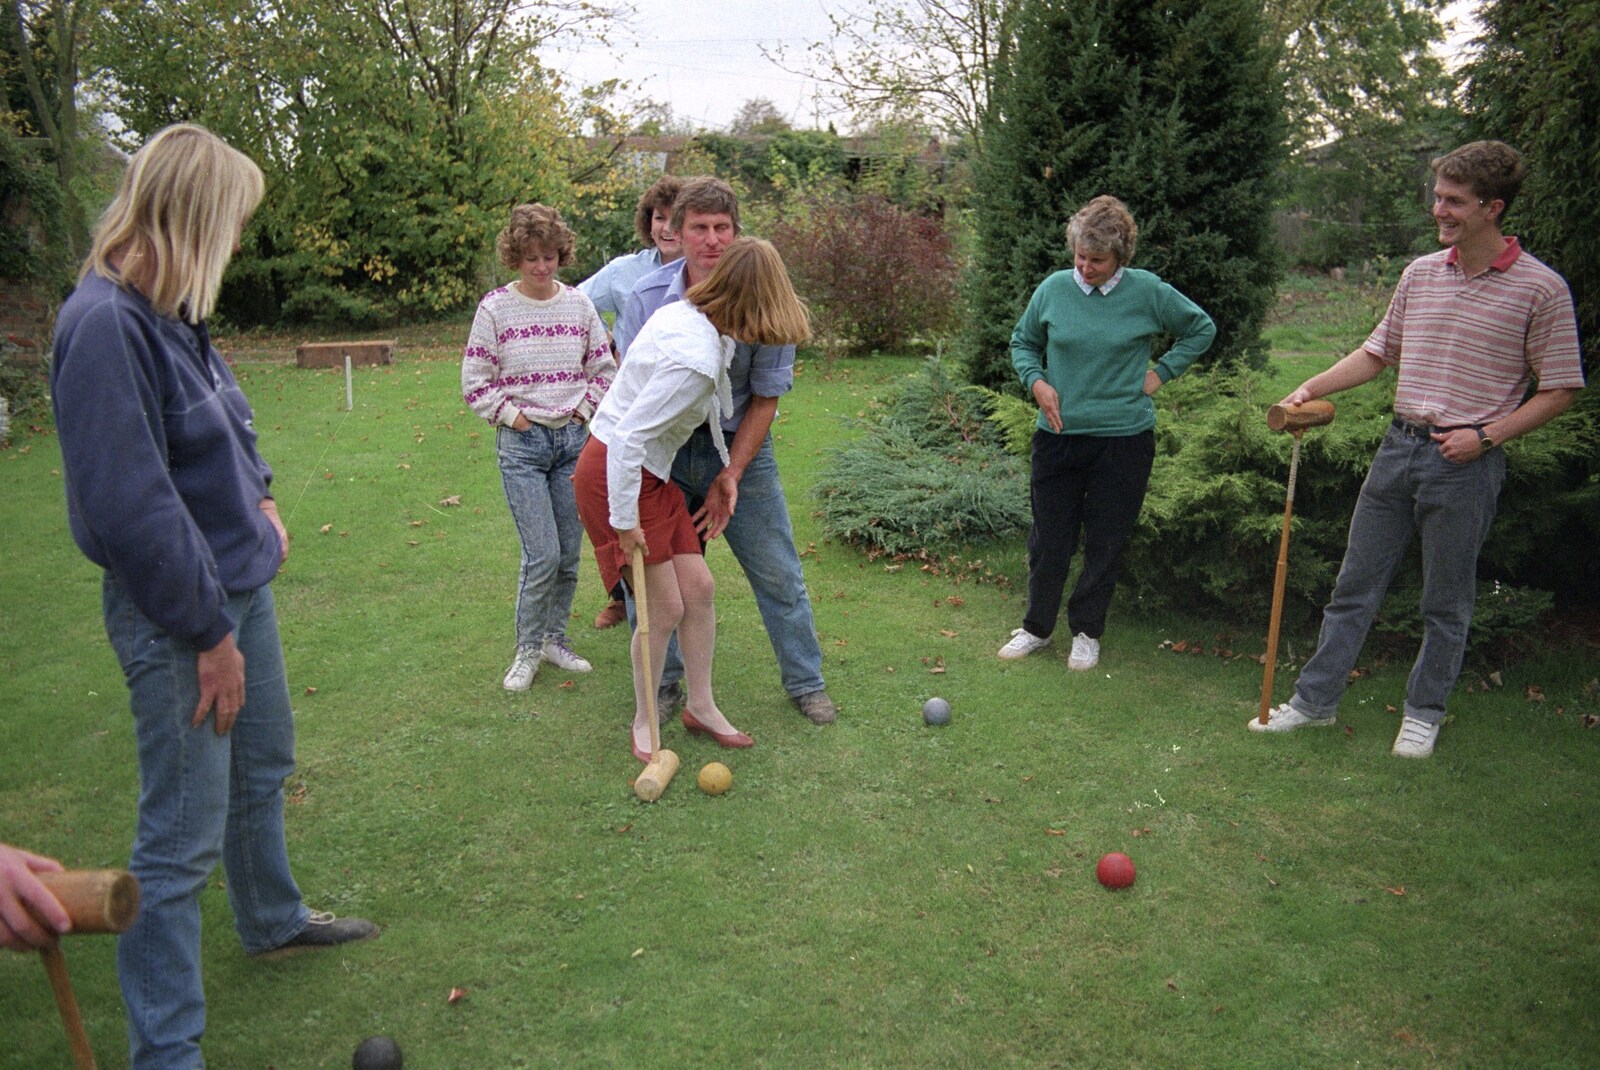 More croquet shenanigans from The Annual Cider Making Event, Stuston, Suffolk - 11th October 1990